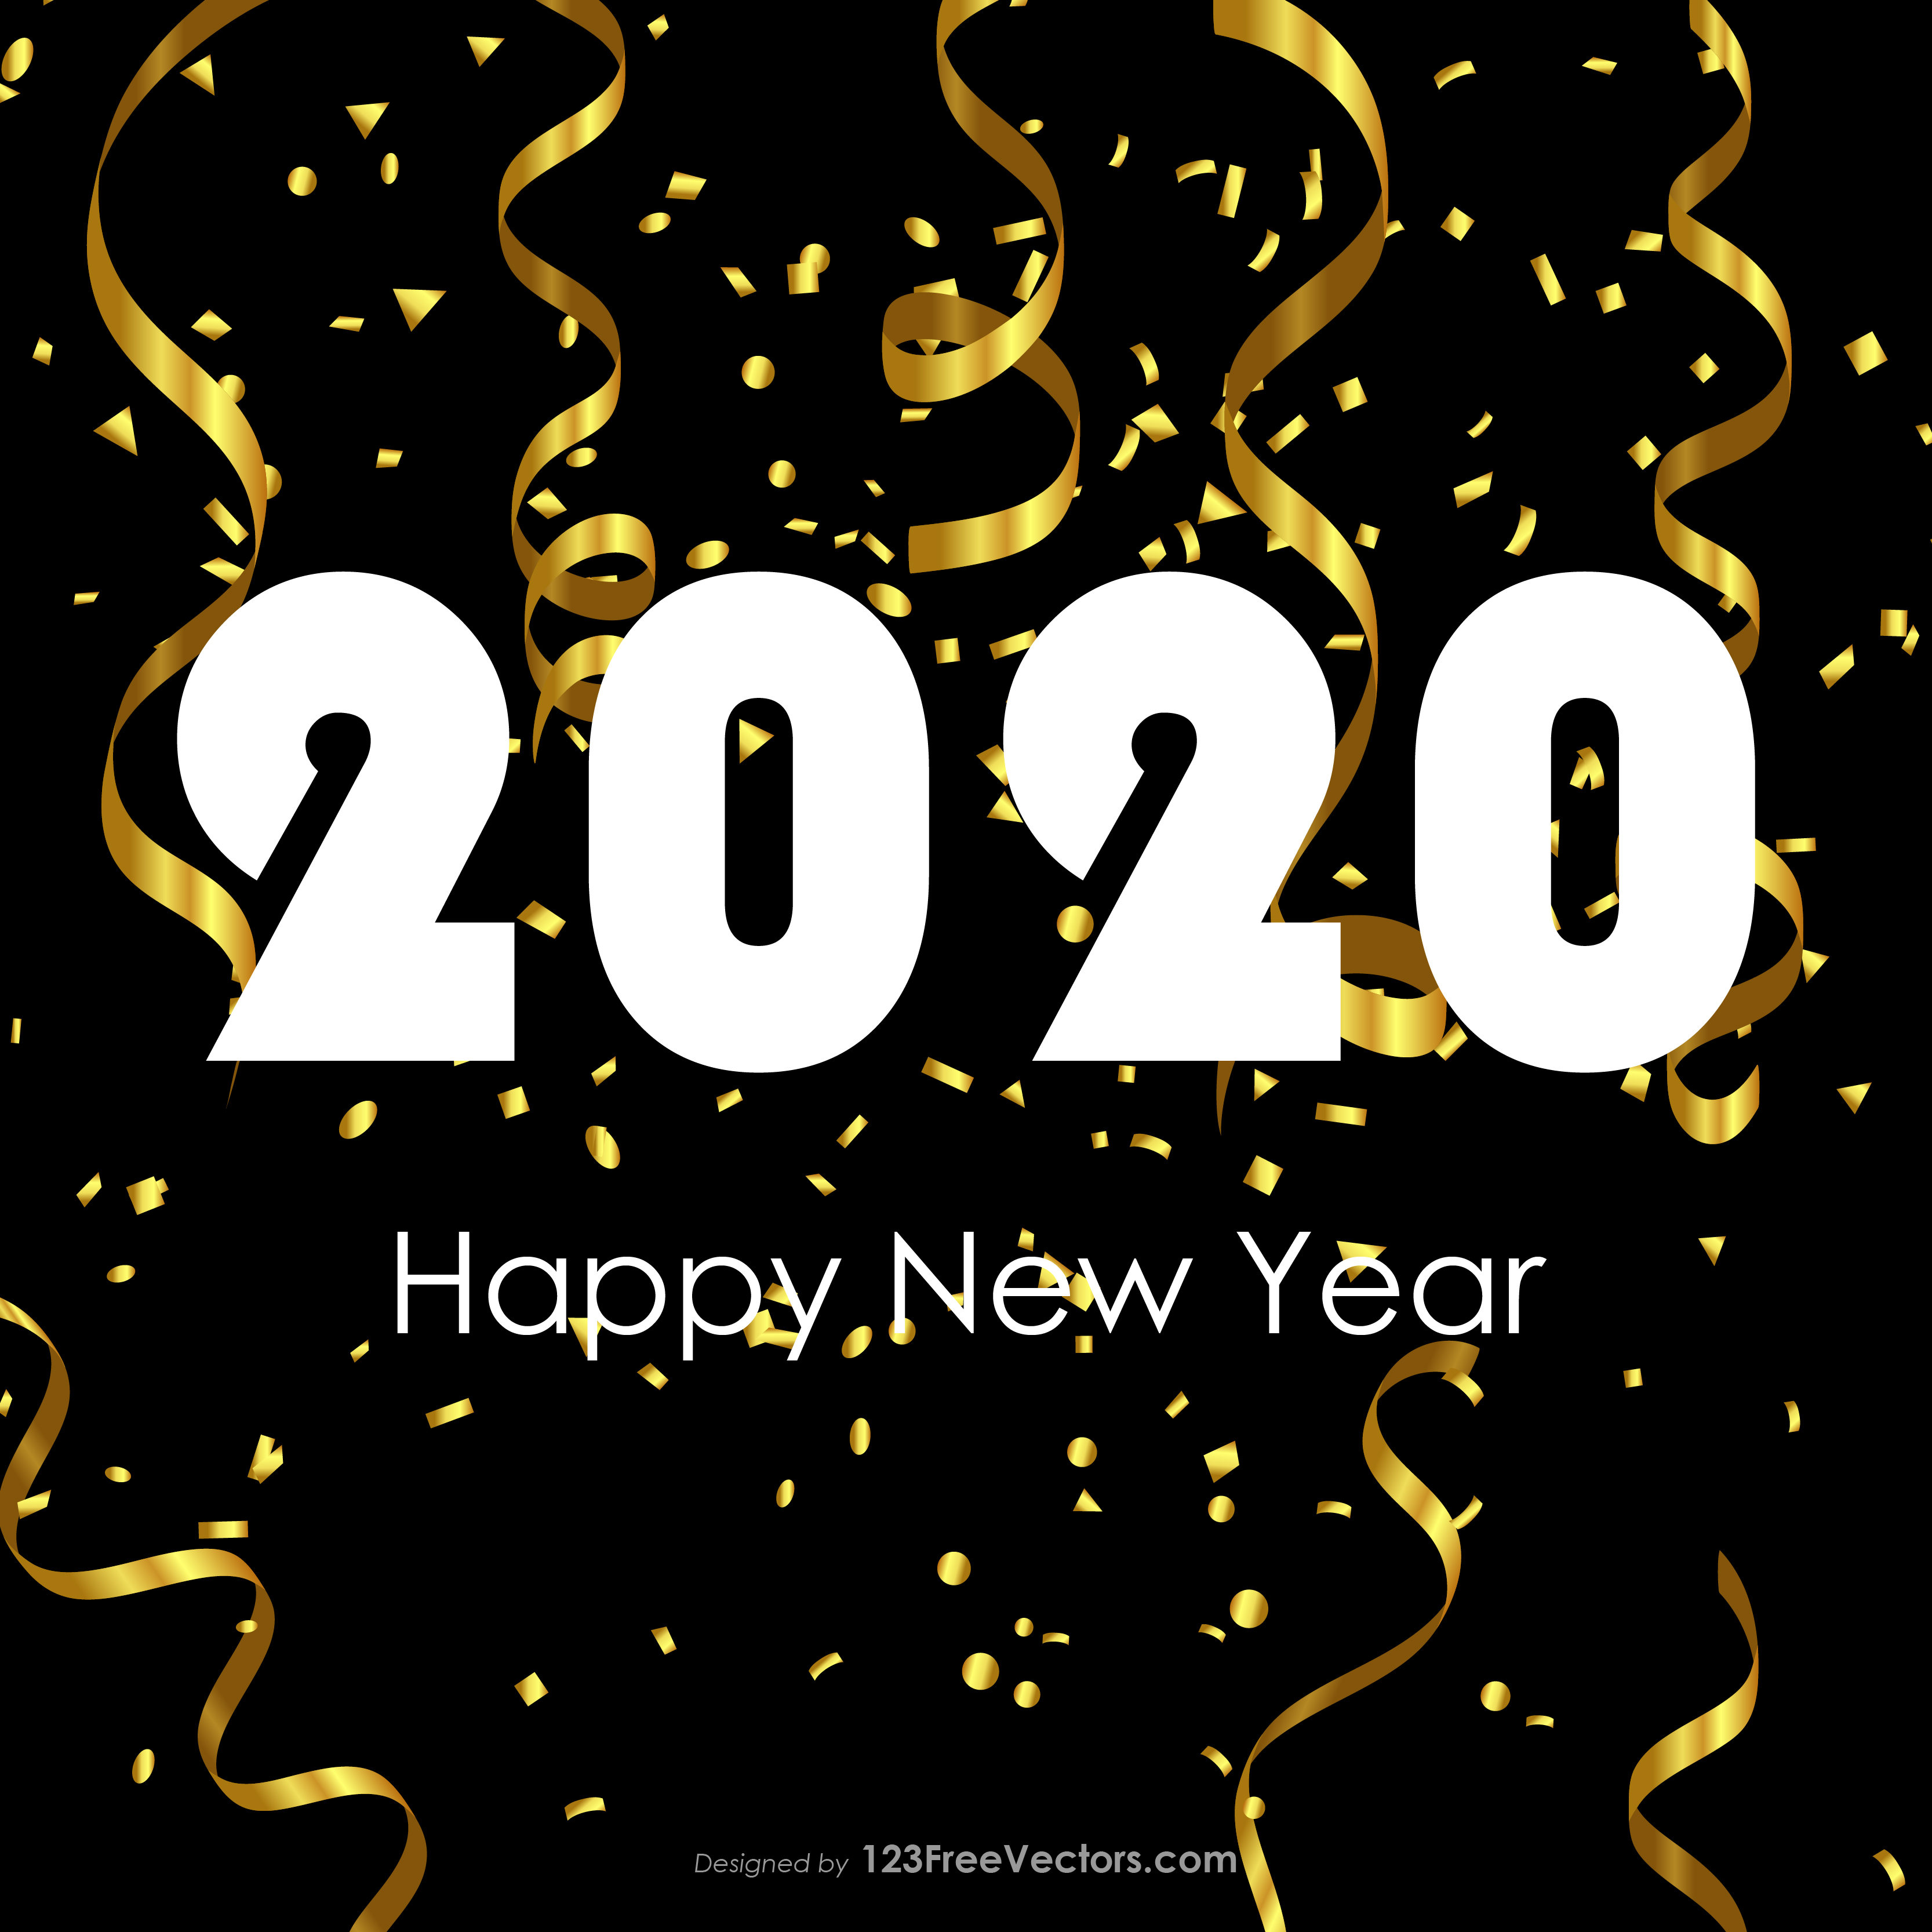 Happy New Year 2020 Gold Streamer and Confetti Background